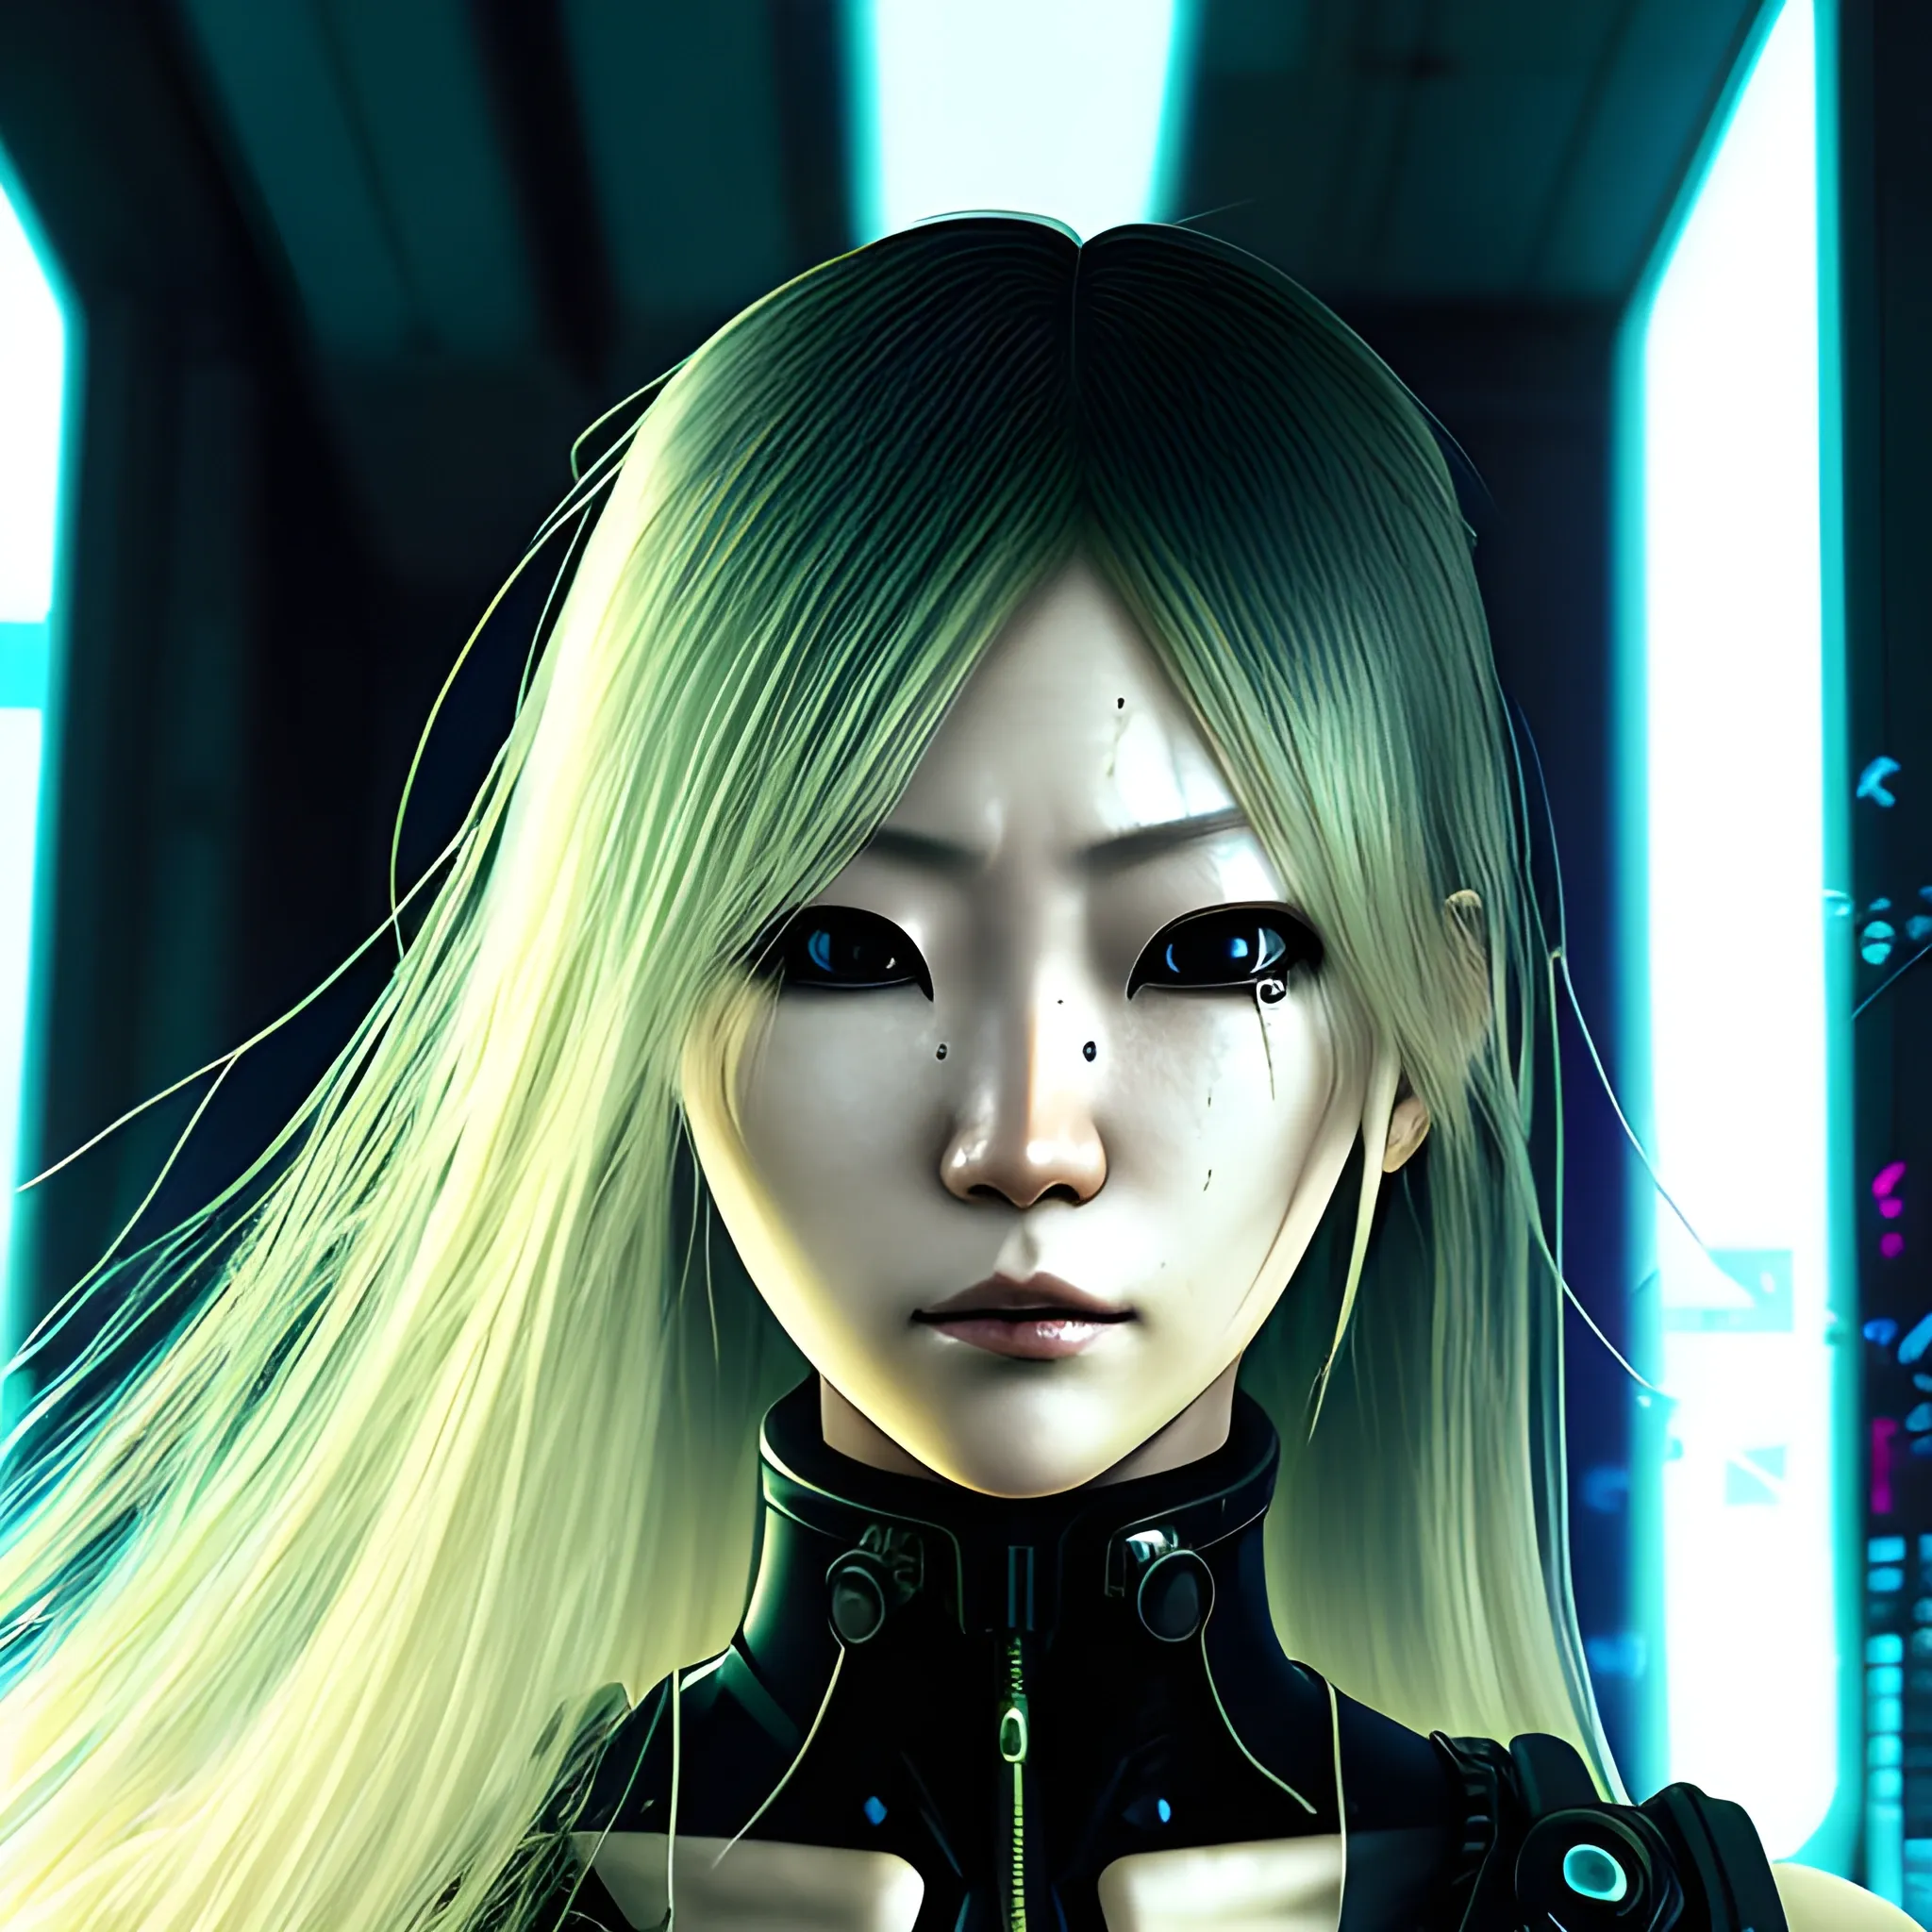 A blonde Japanese woman with long cyberpunk hair looks into the frame, a black tear flows from her right eye